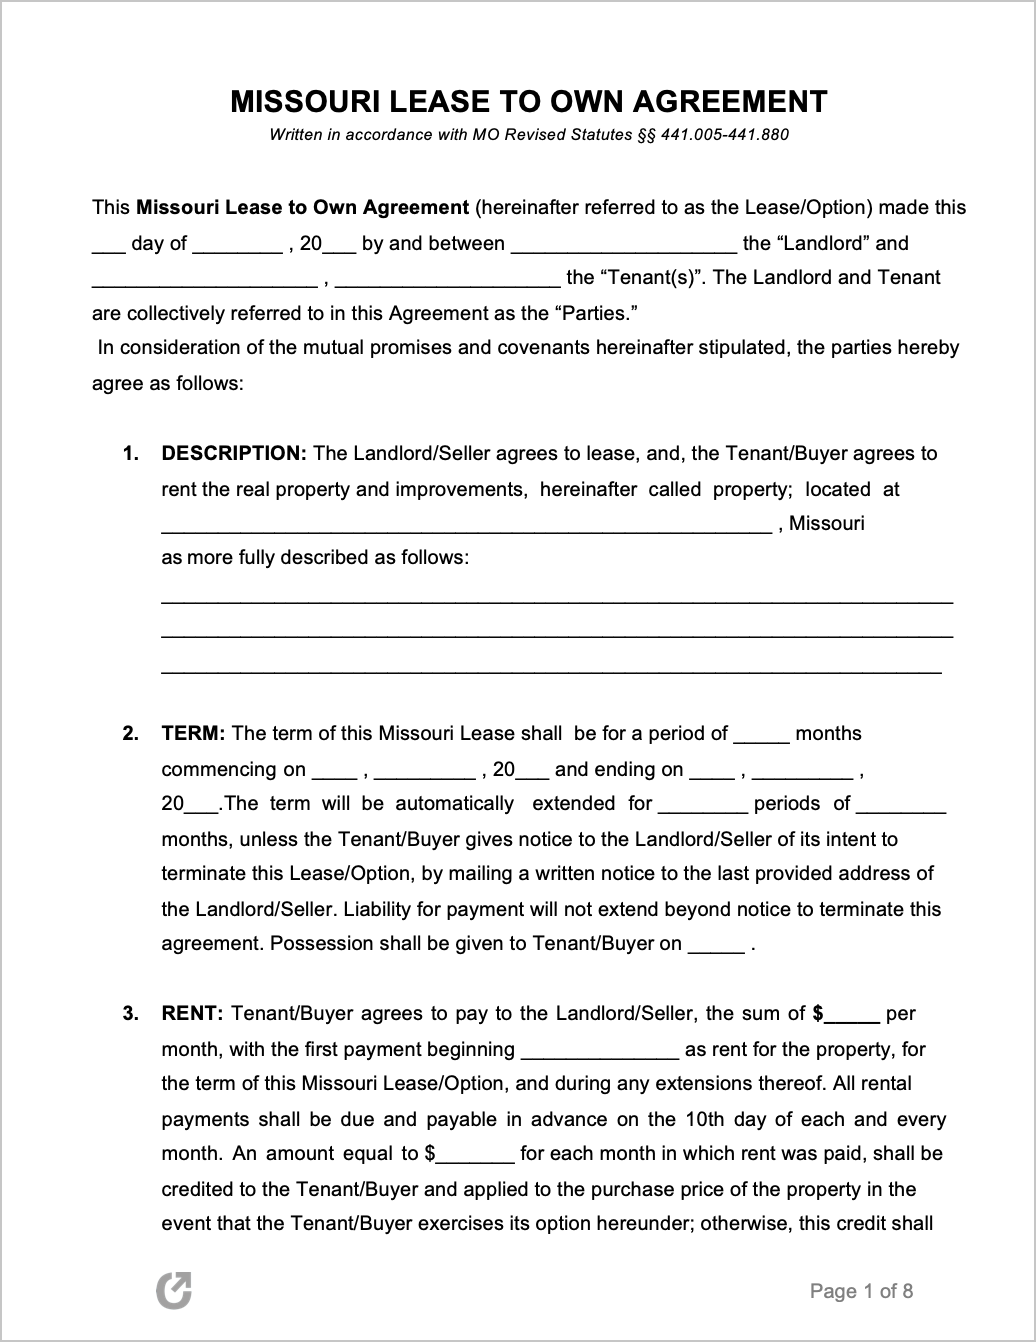 Free Missouri Lease to Own Agreement  PDF  WORD Inside free rent to own agreement template